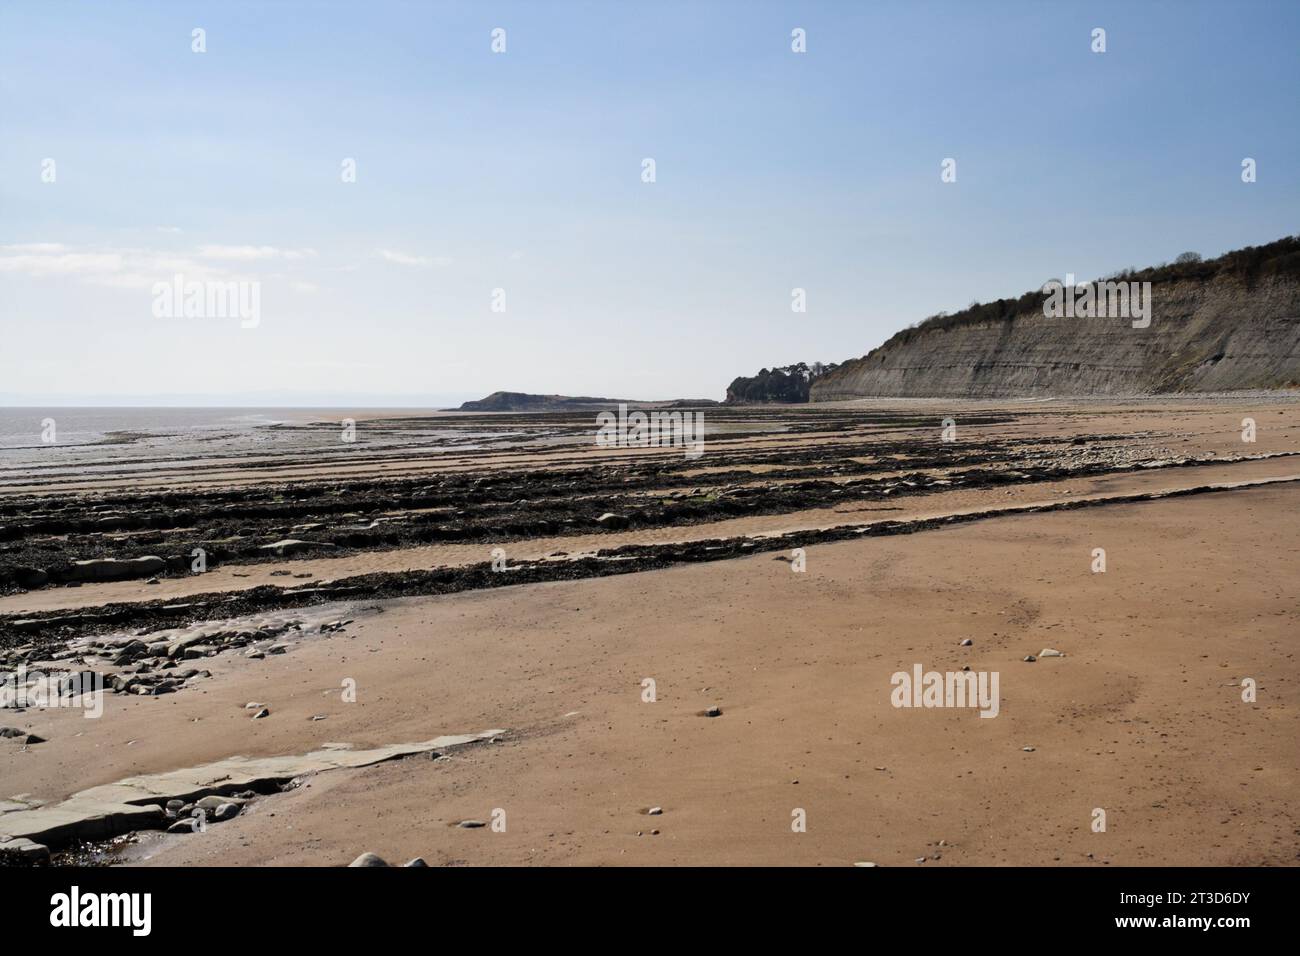 Deserted beach at Lavernock Point in Wales UK, Welsh coast coastline Quiet empty beach seaside British coast Scenic view of beach and sky Stock Photo